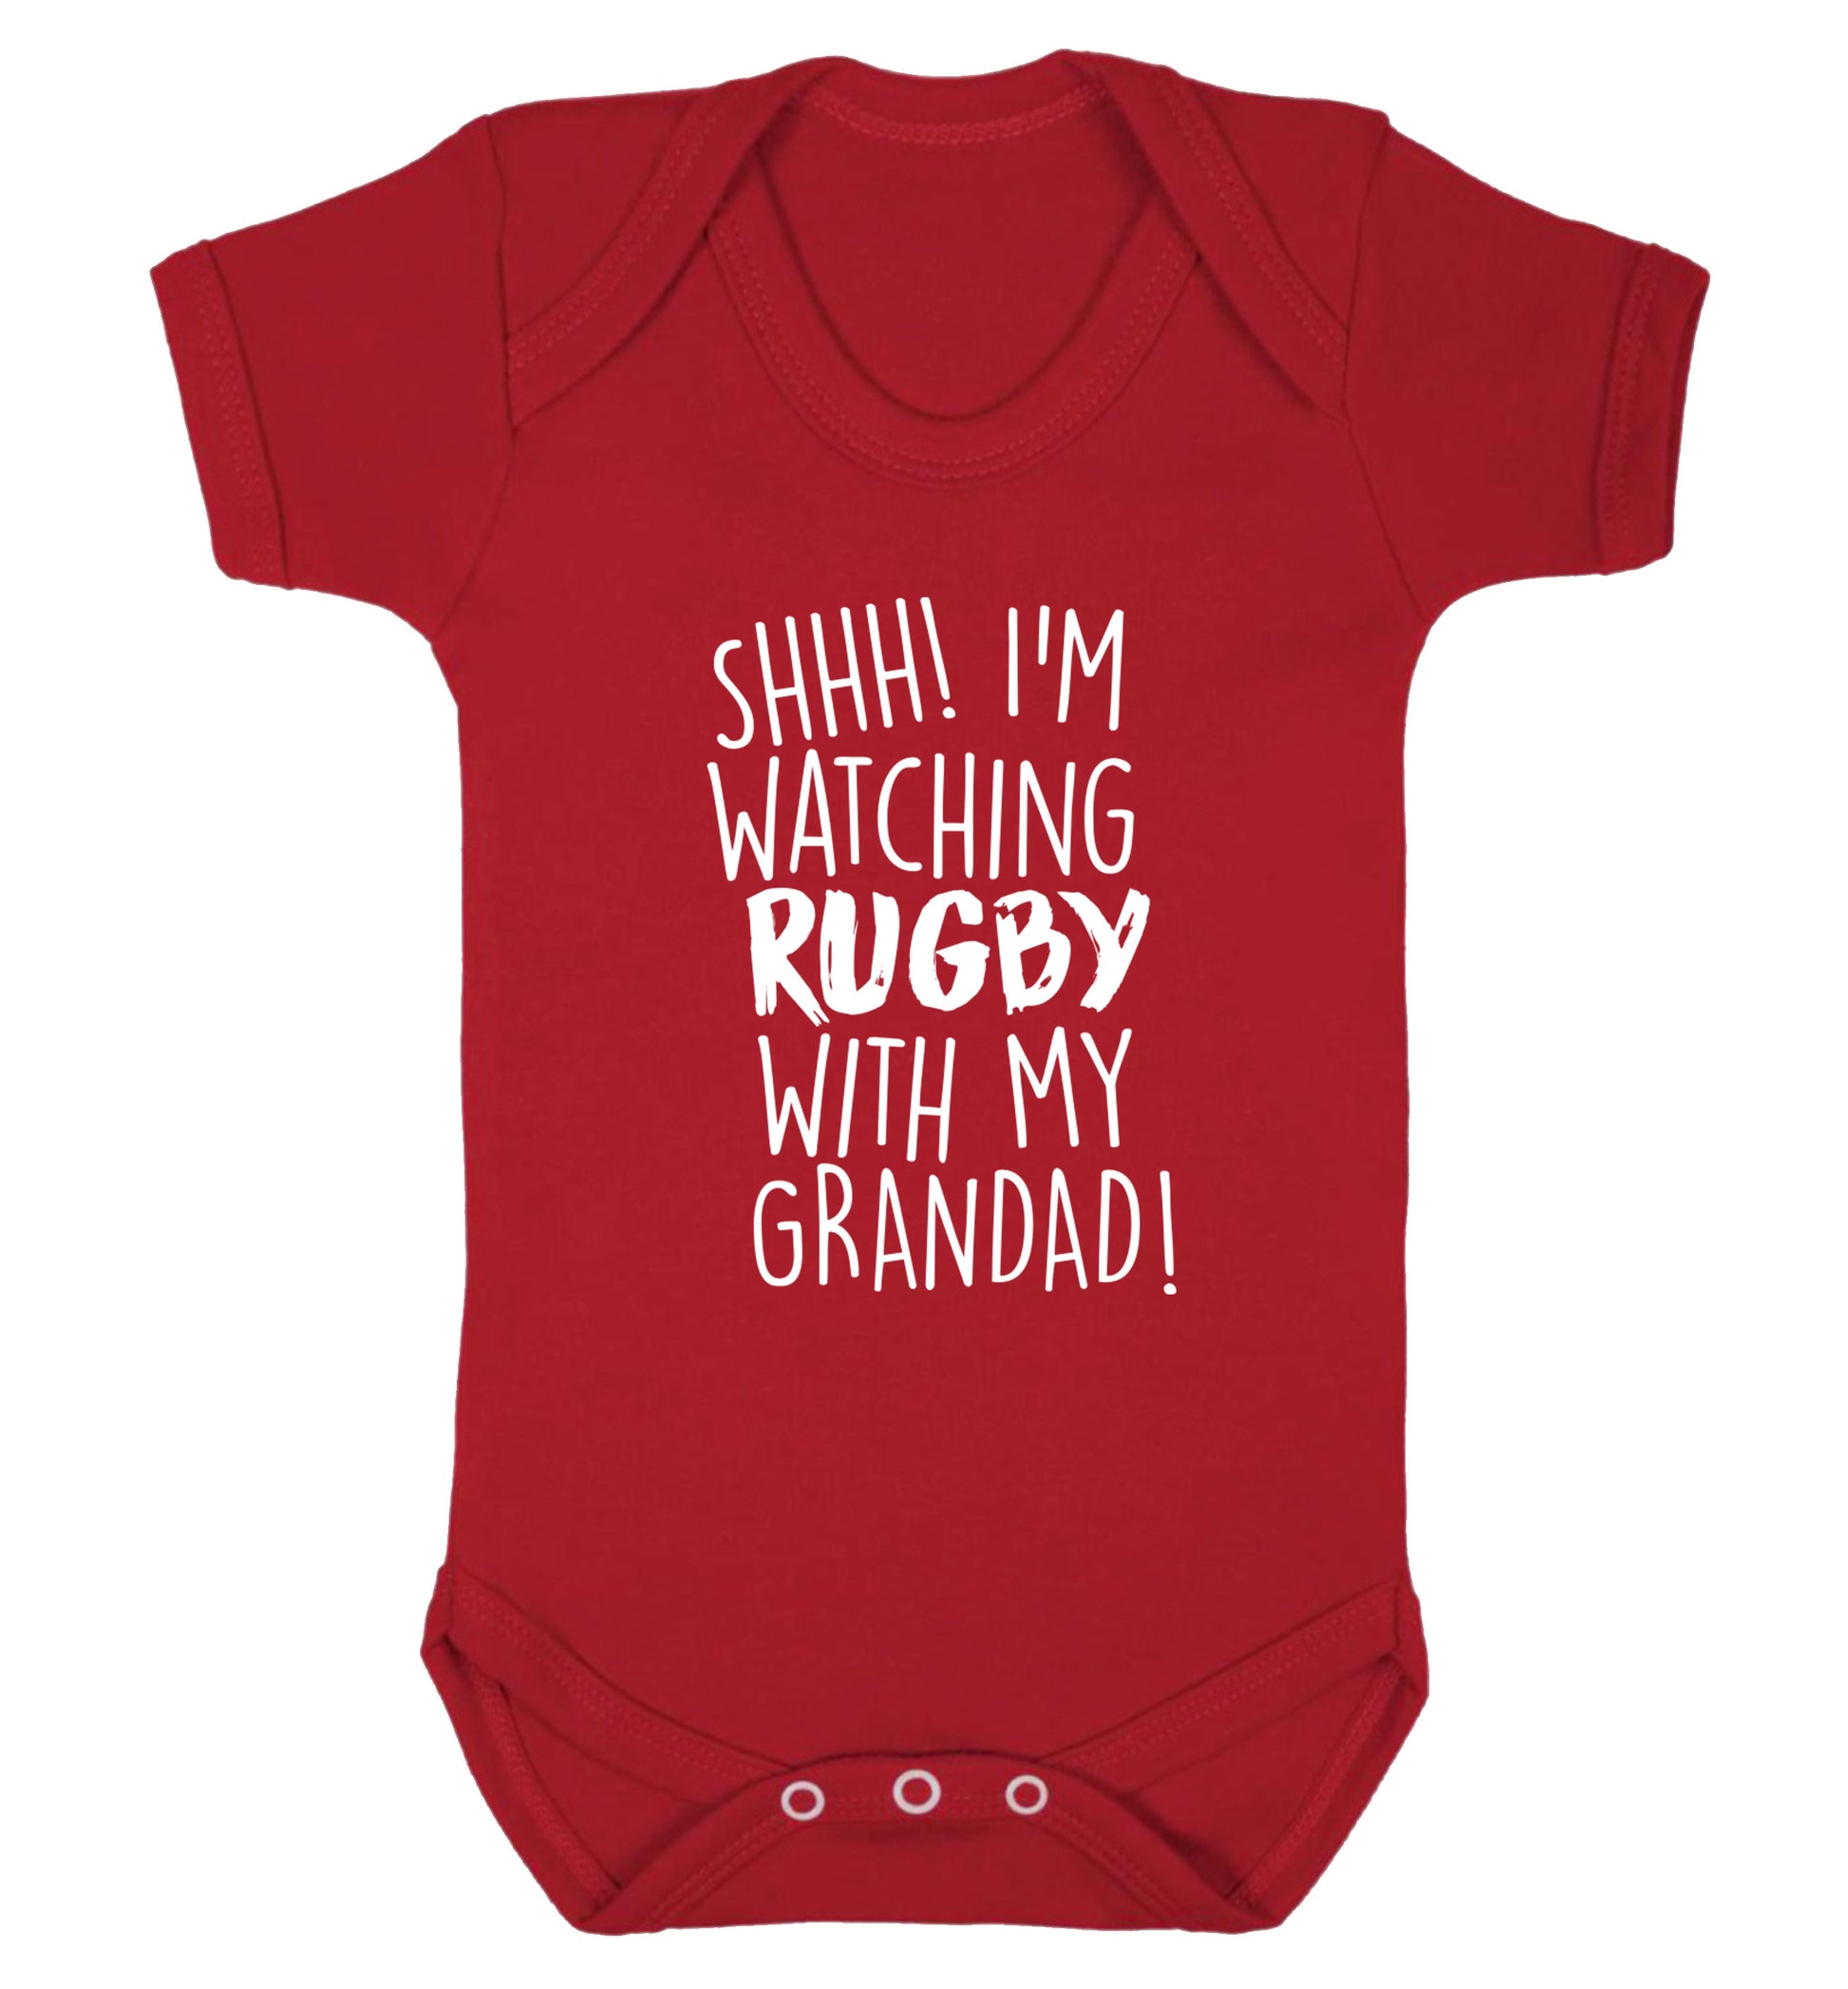 Shh I'm watching rugby with my grandaughter Baby Vest red 18-24 months